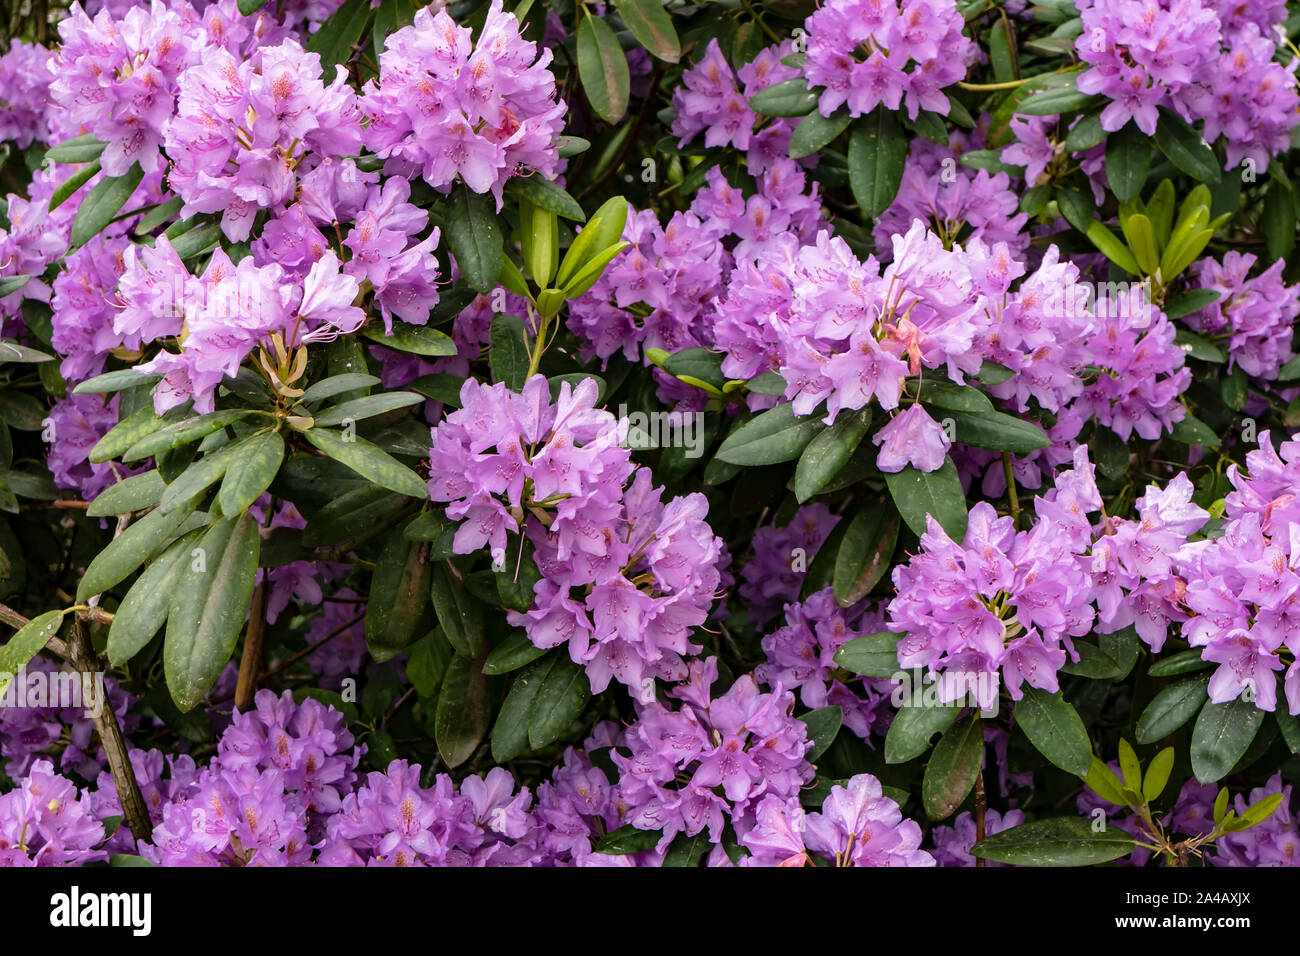 Evergreen shrub rhododendron blooms beautiful purple flowers. Close-up. Stock Photo